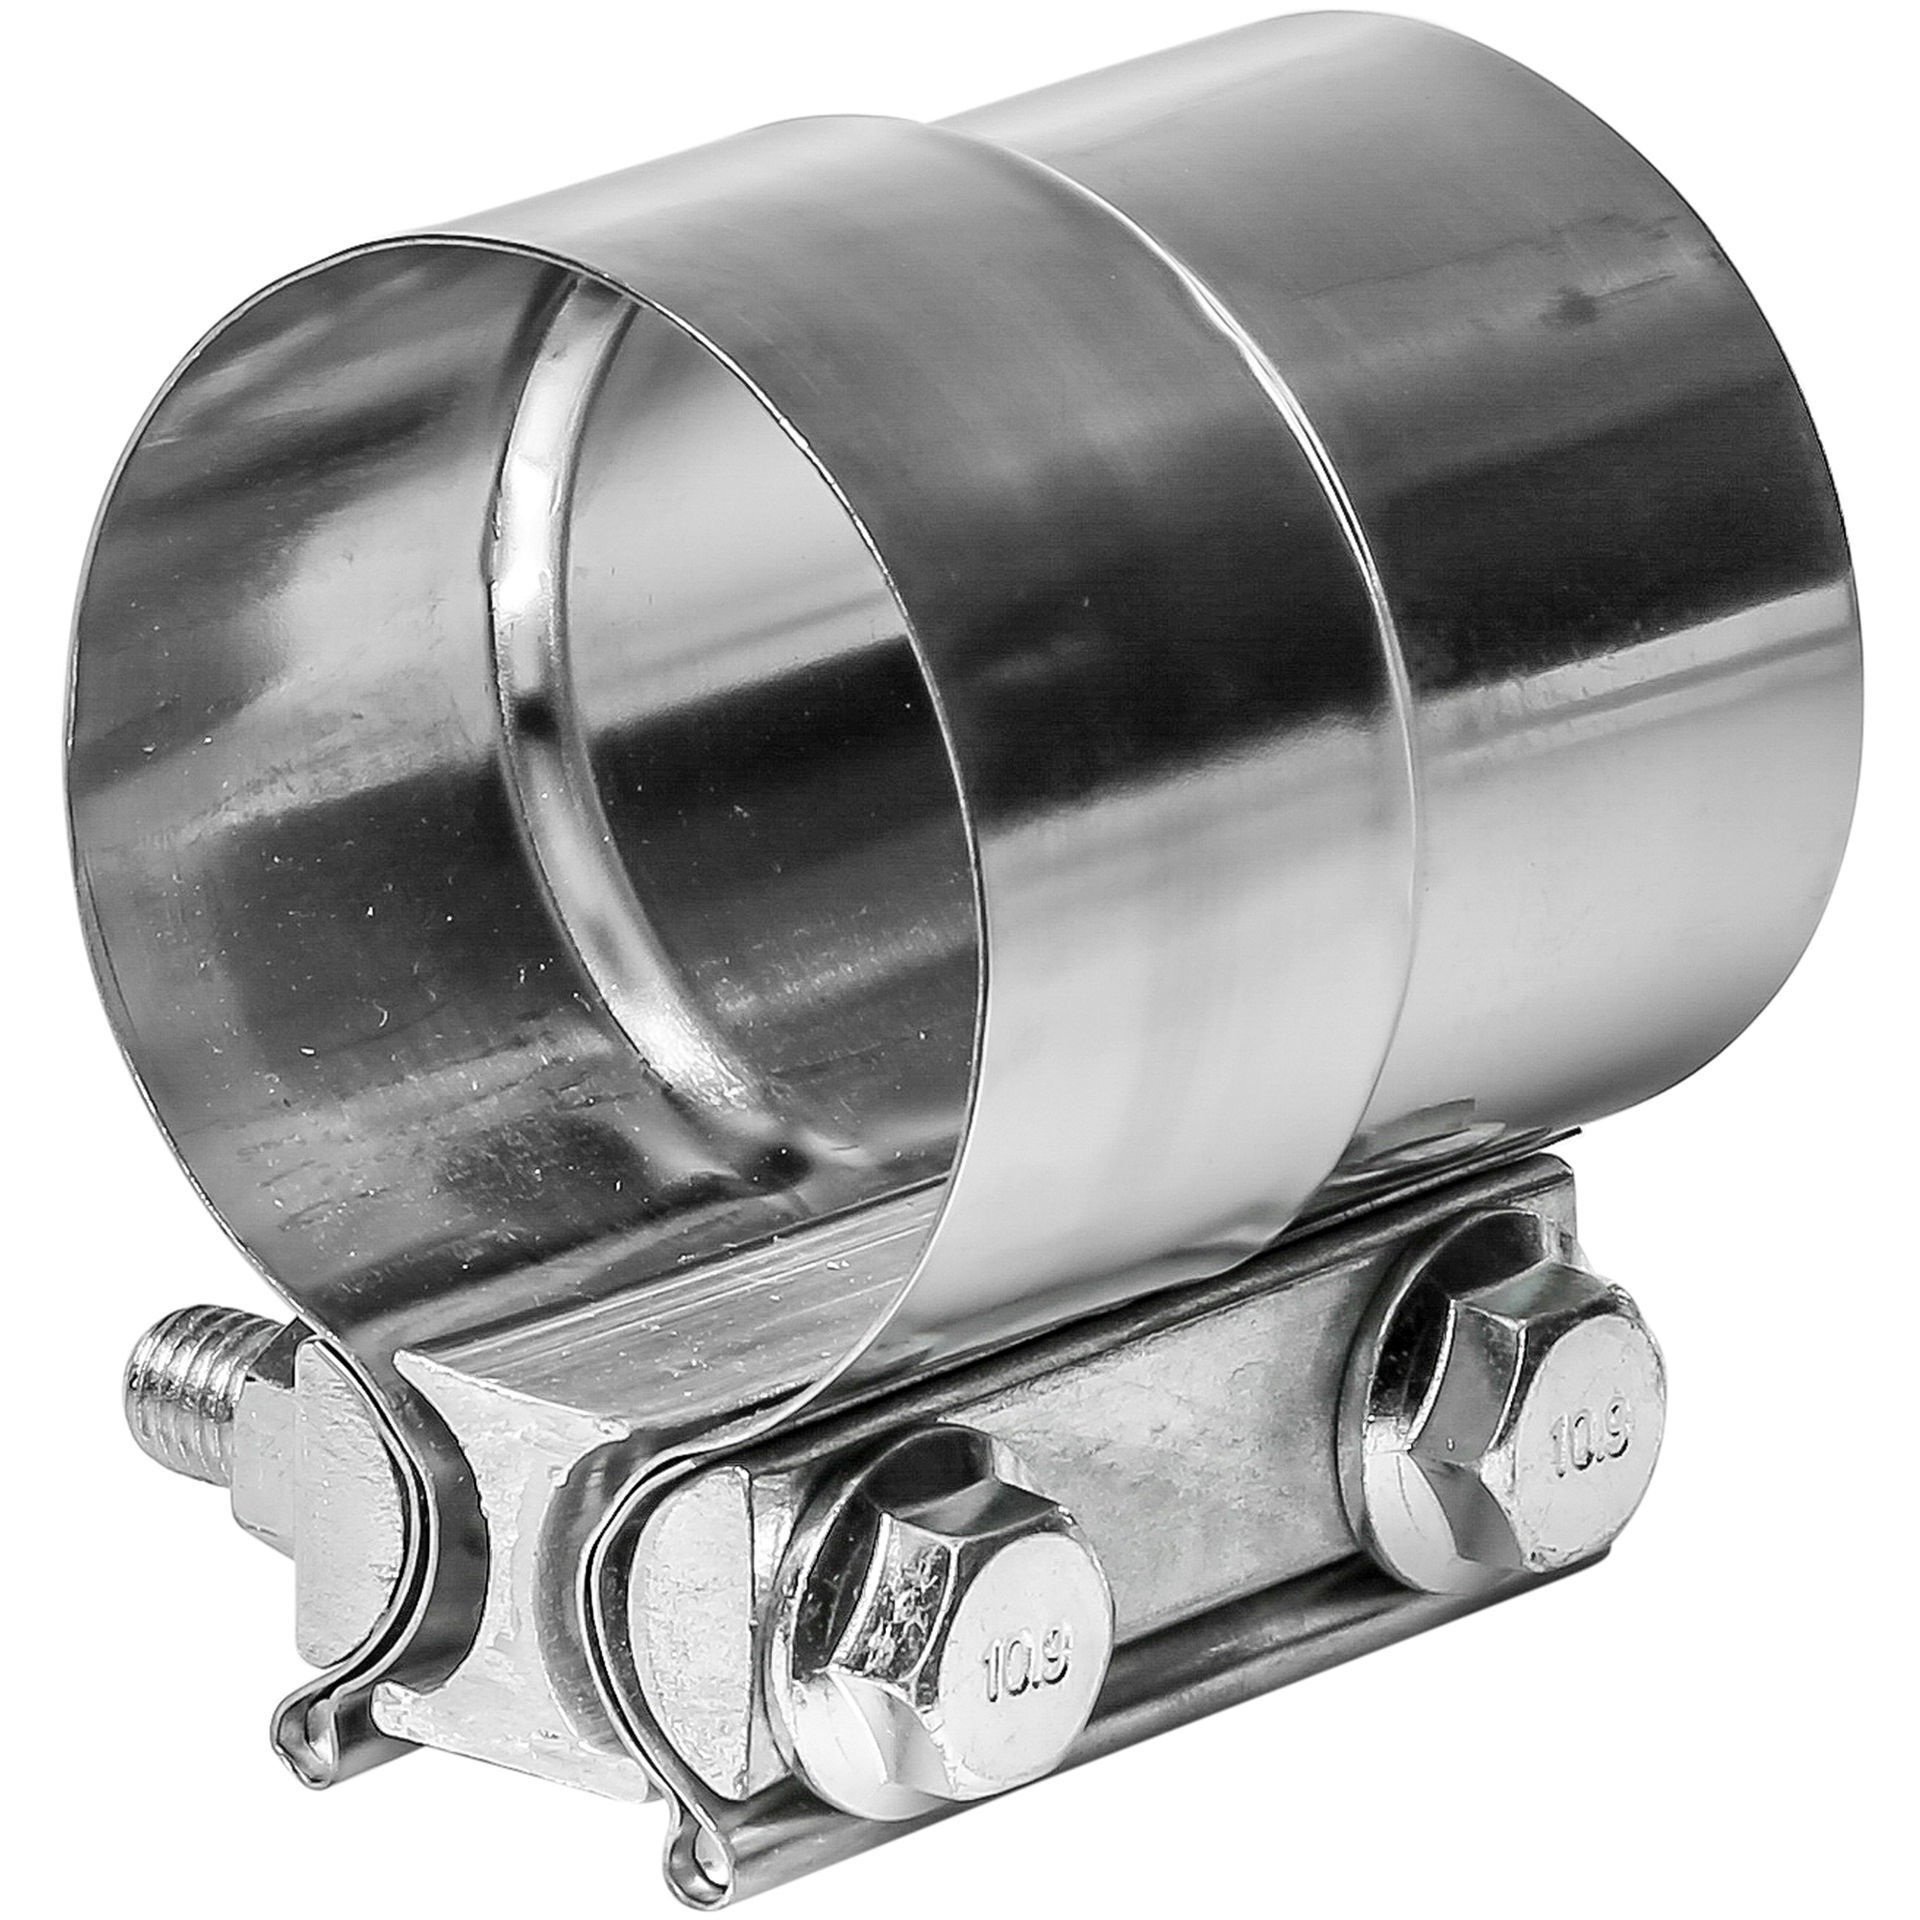 TOTALFLOW 5 TF-JB64 304 Stainless Steel Butt Joint Exhaust Muffler Clamp Band-5 Inch 